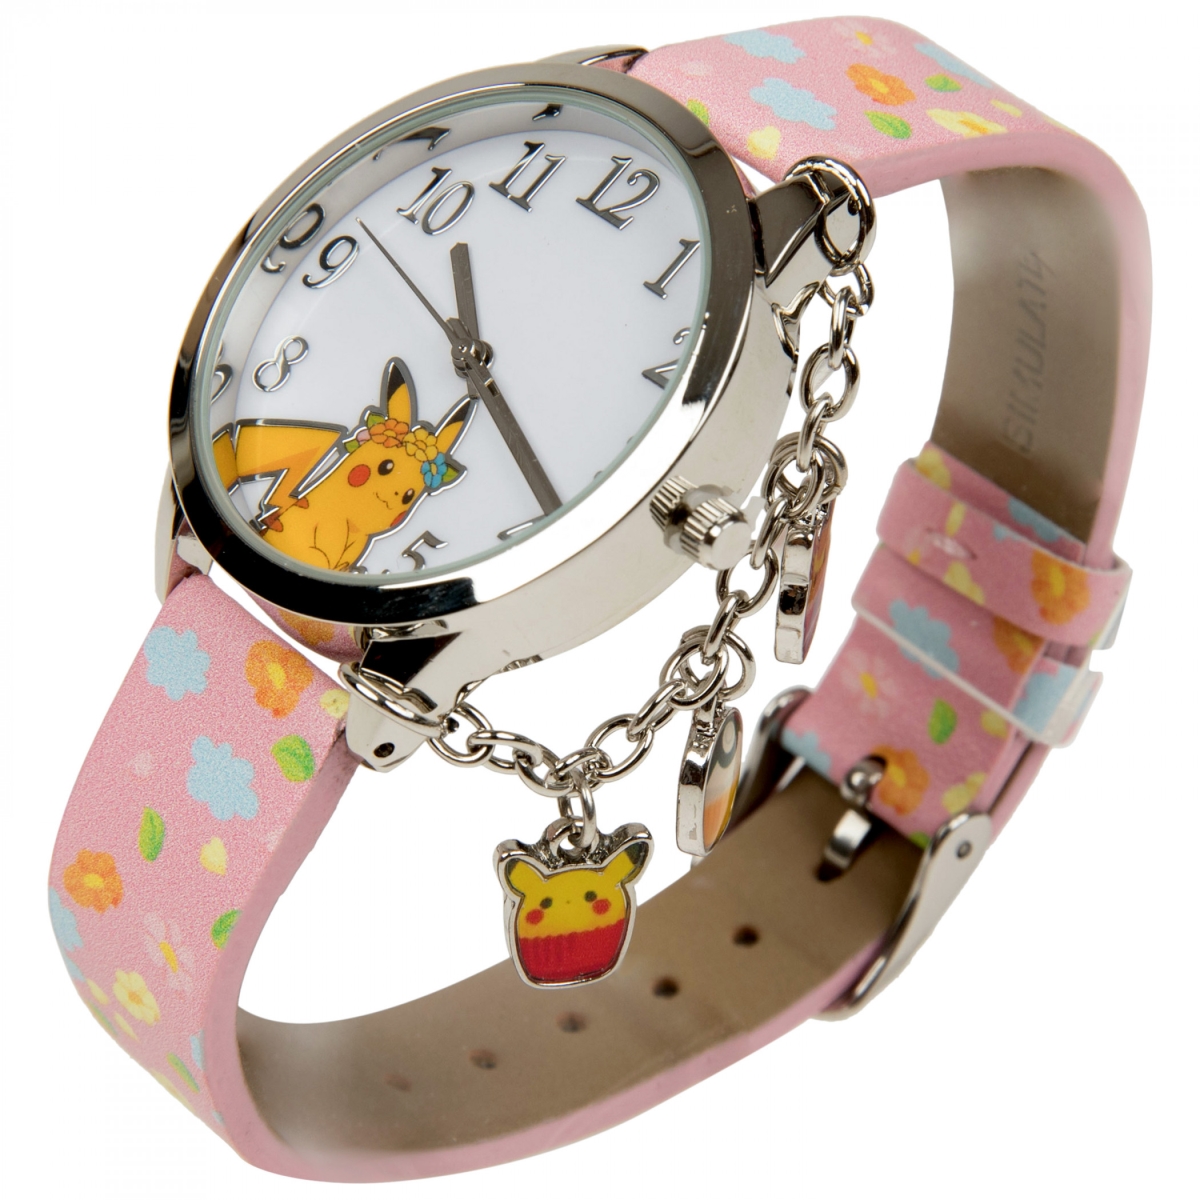 Picture of Pokemon 849323 Nintendo Pikachu Watch with Charms & Silicone Band